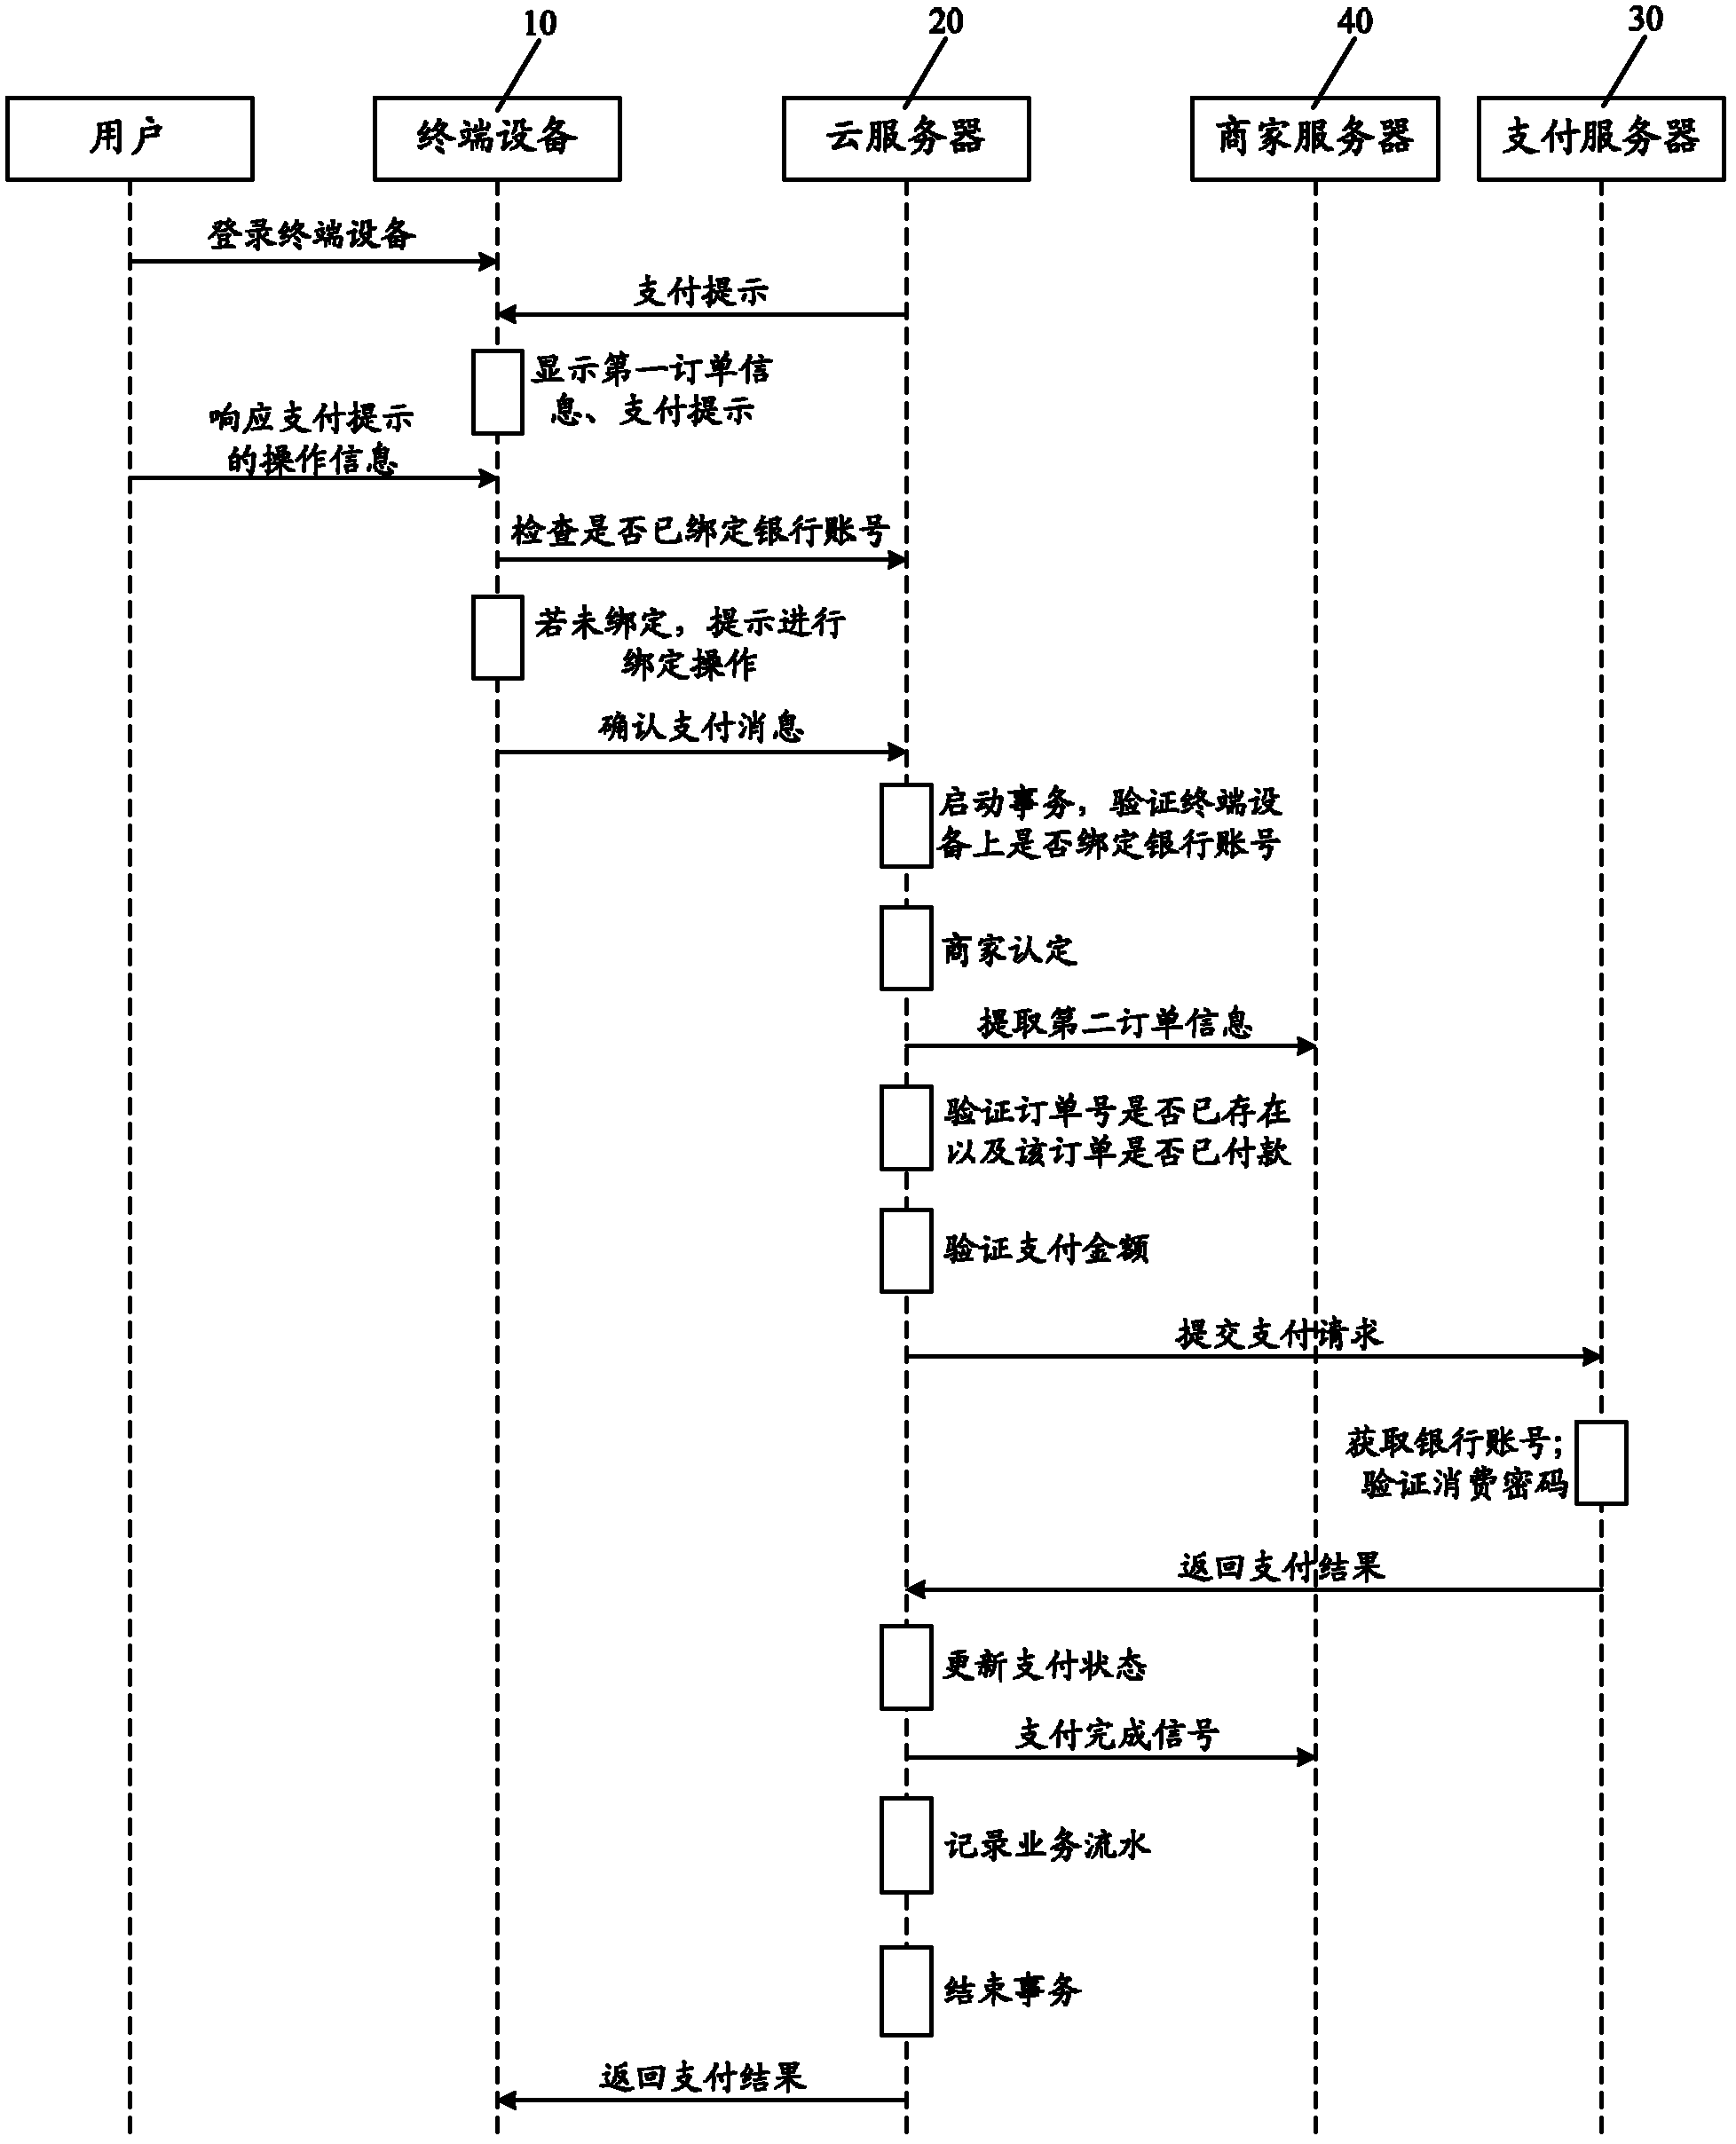 Electronic payment system based on cloud data processing technology